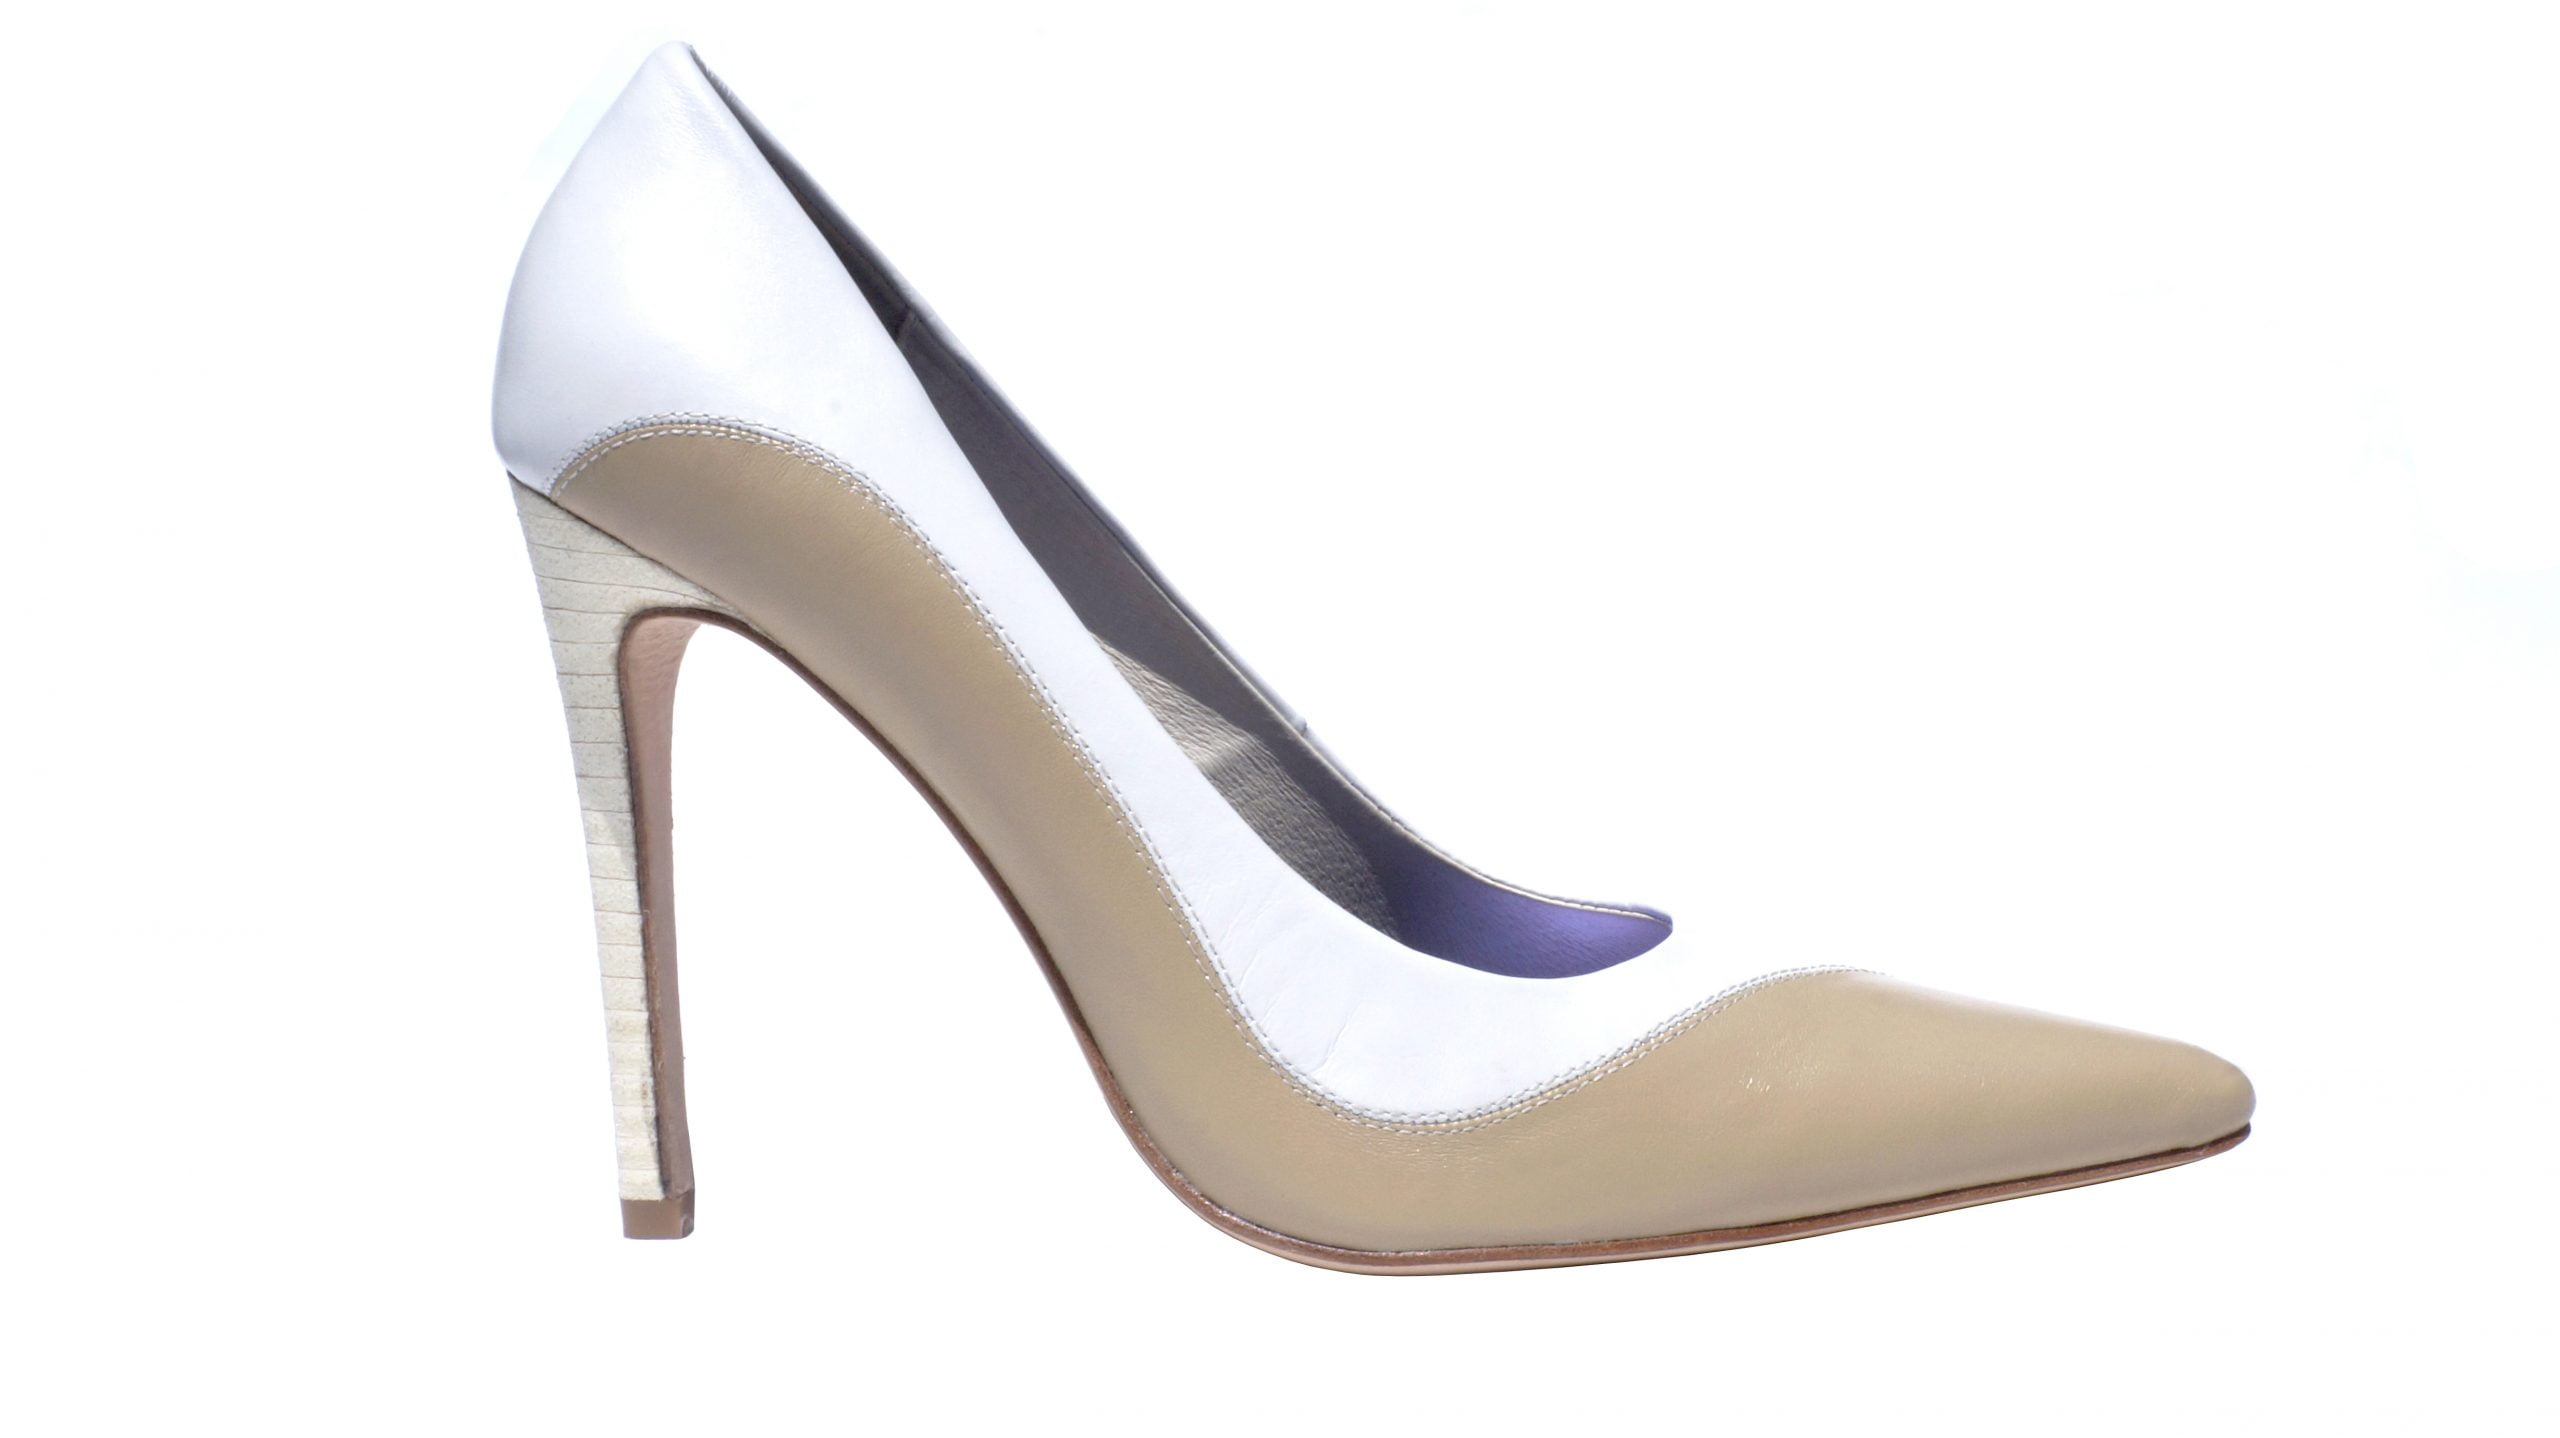 Ivory and cream asymmetrical point toe pump, 4 inch heel